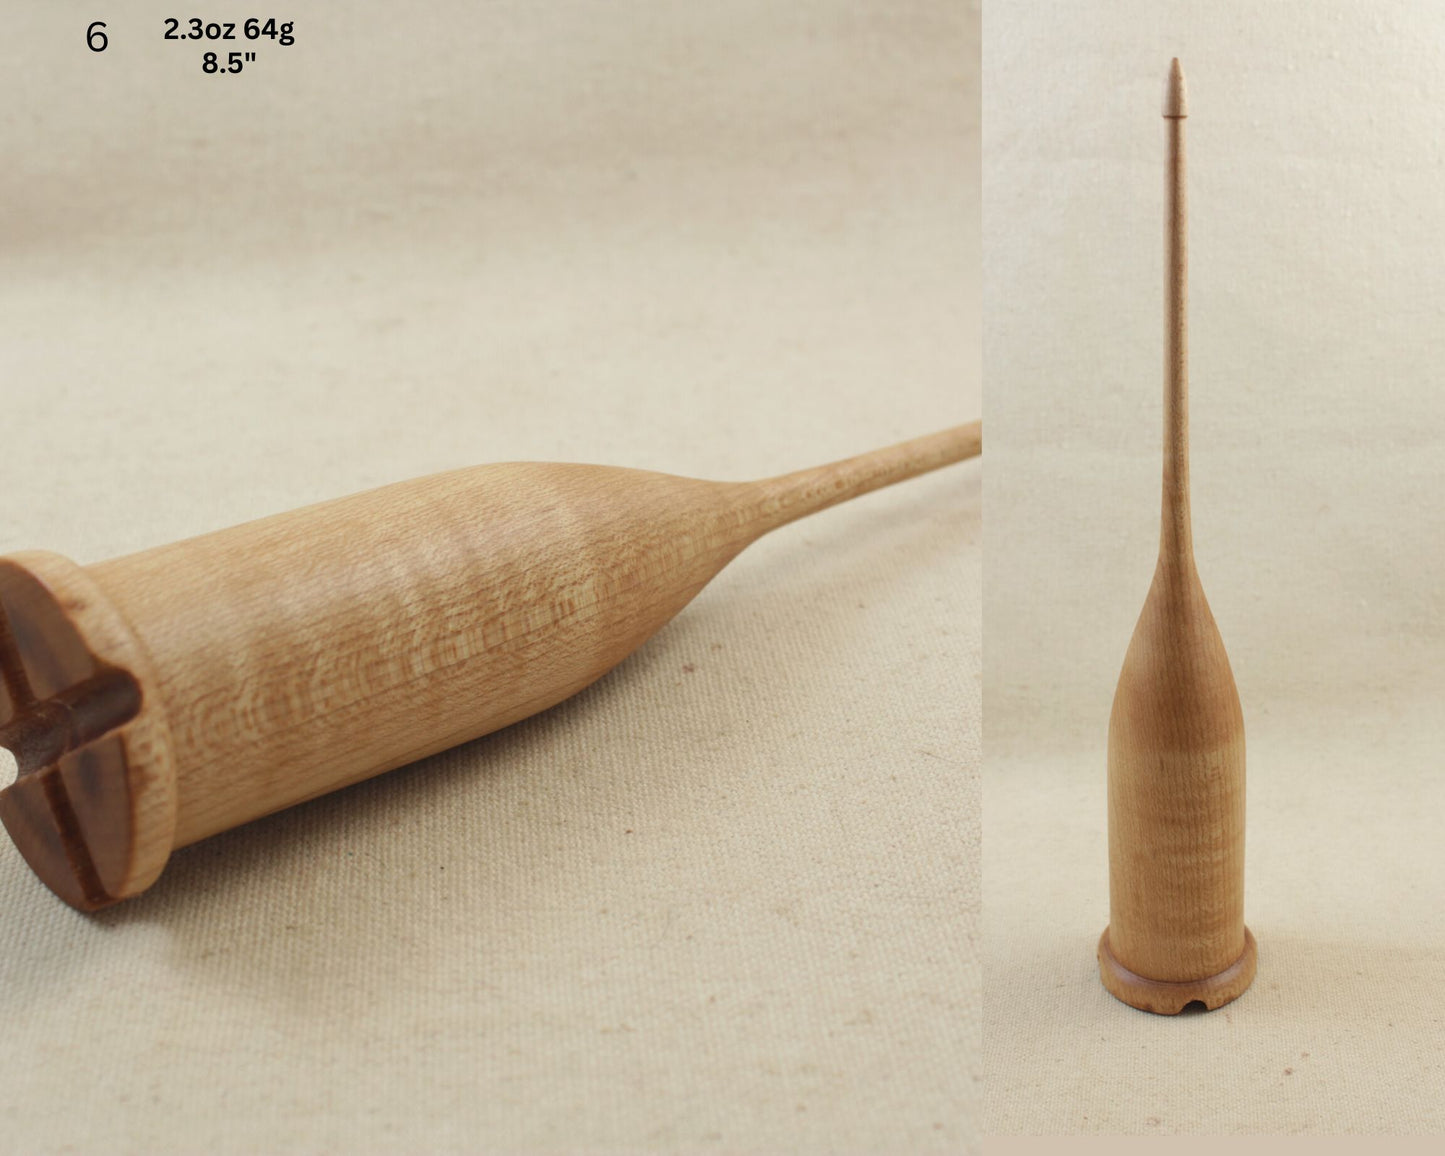 Maple Scottish style drop spindle 9 inch